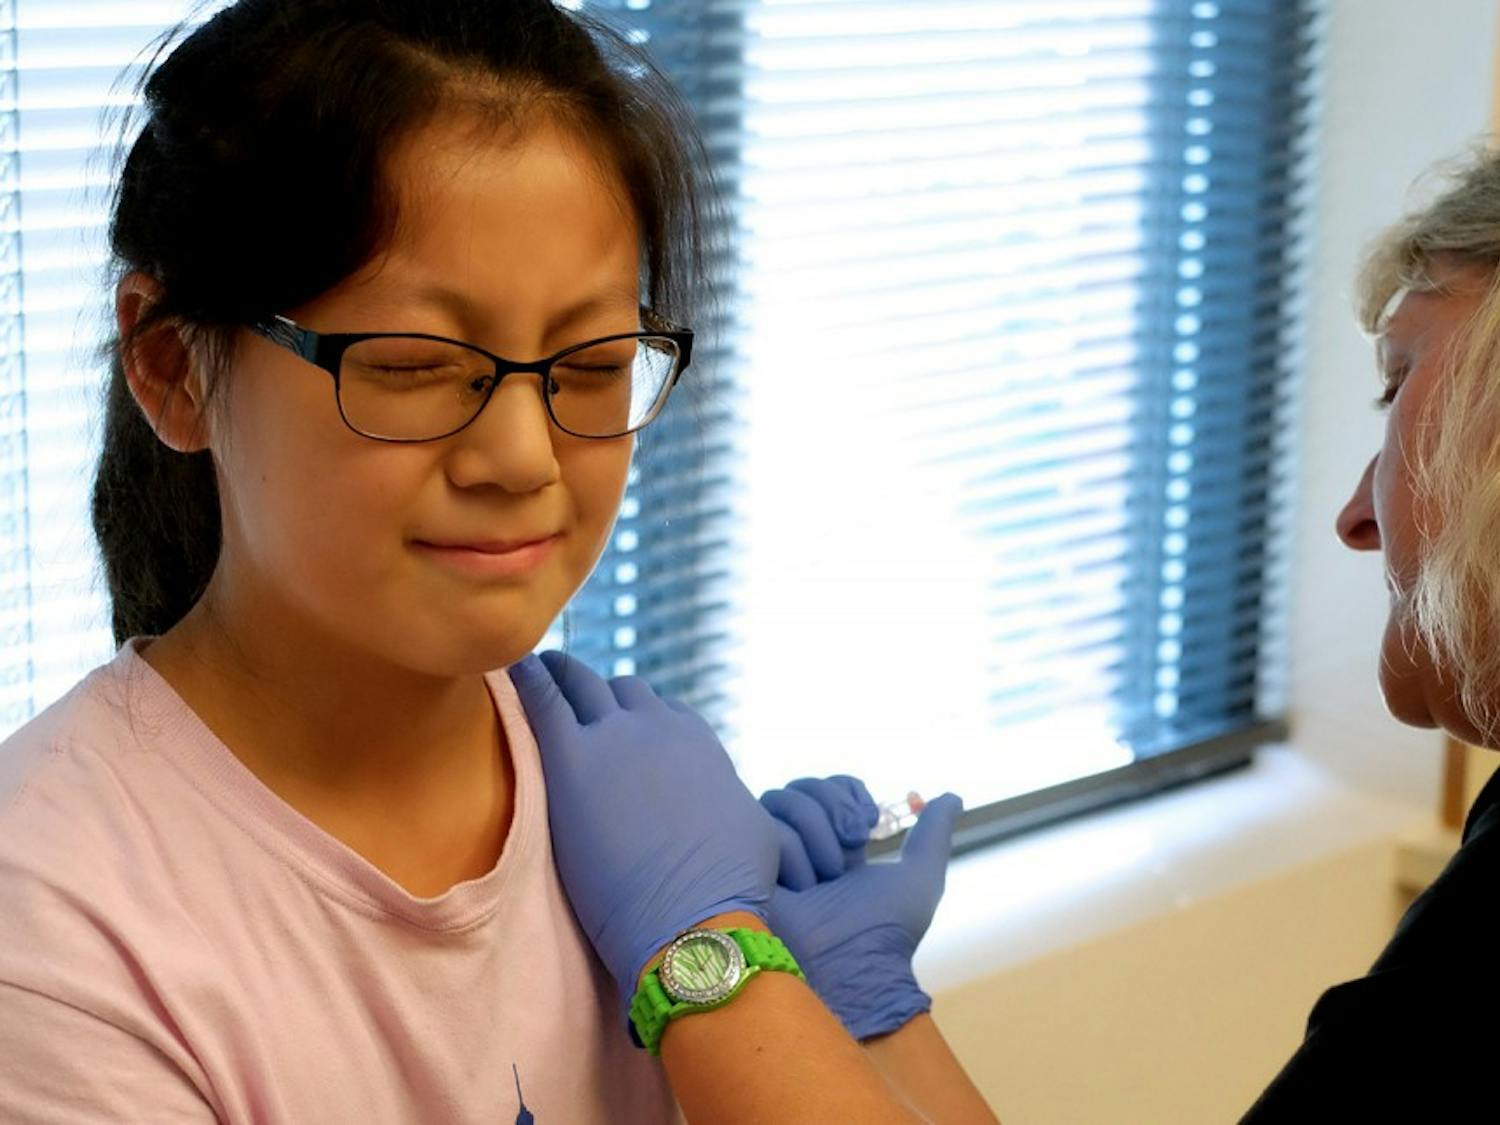 Melissa Du, 11, bravely sits still for the Tdap vaccine. The Tdap protects against tetanus, diphtheria, and pertussis. Not a single tear was shed. 